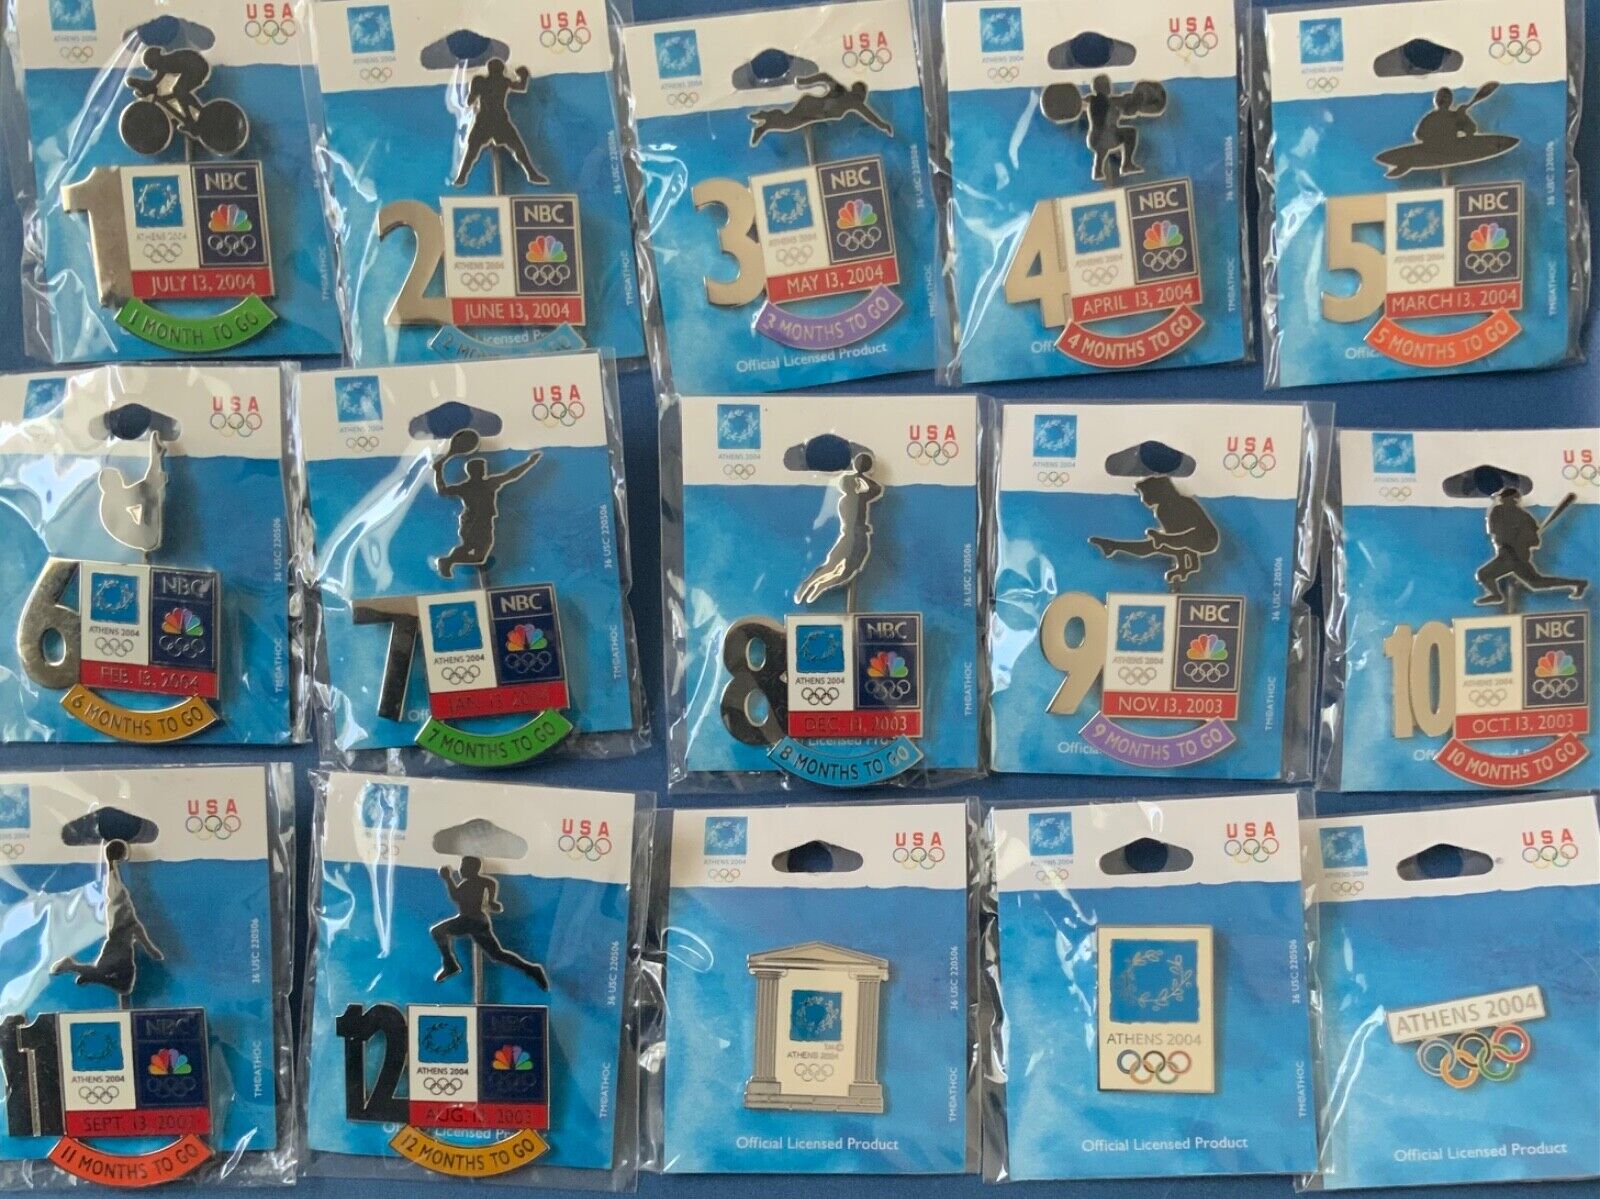 Athens 2004 Olympics rare complete set of NBC 12 months to go spring sports pins